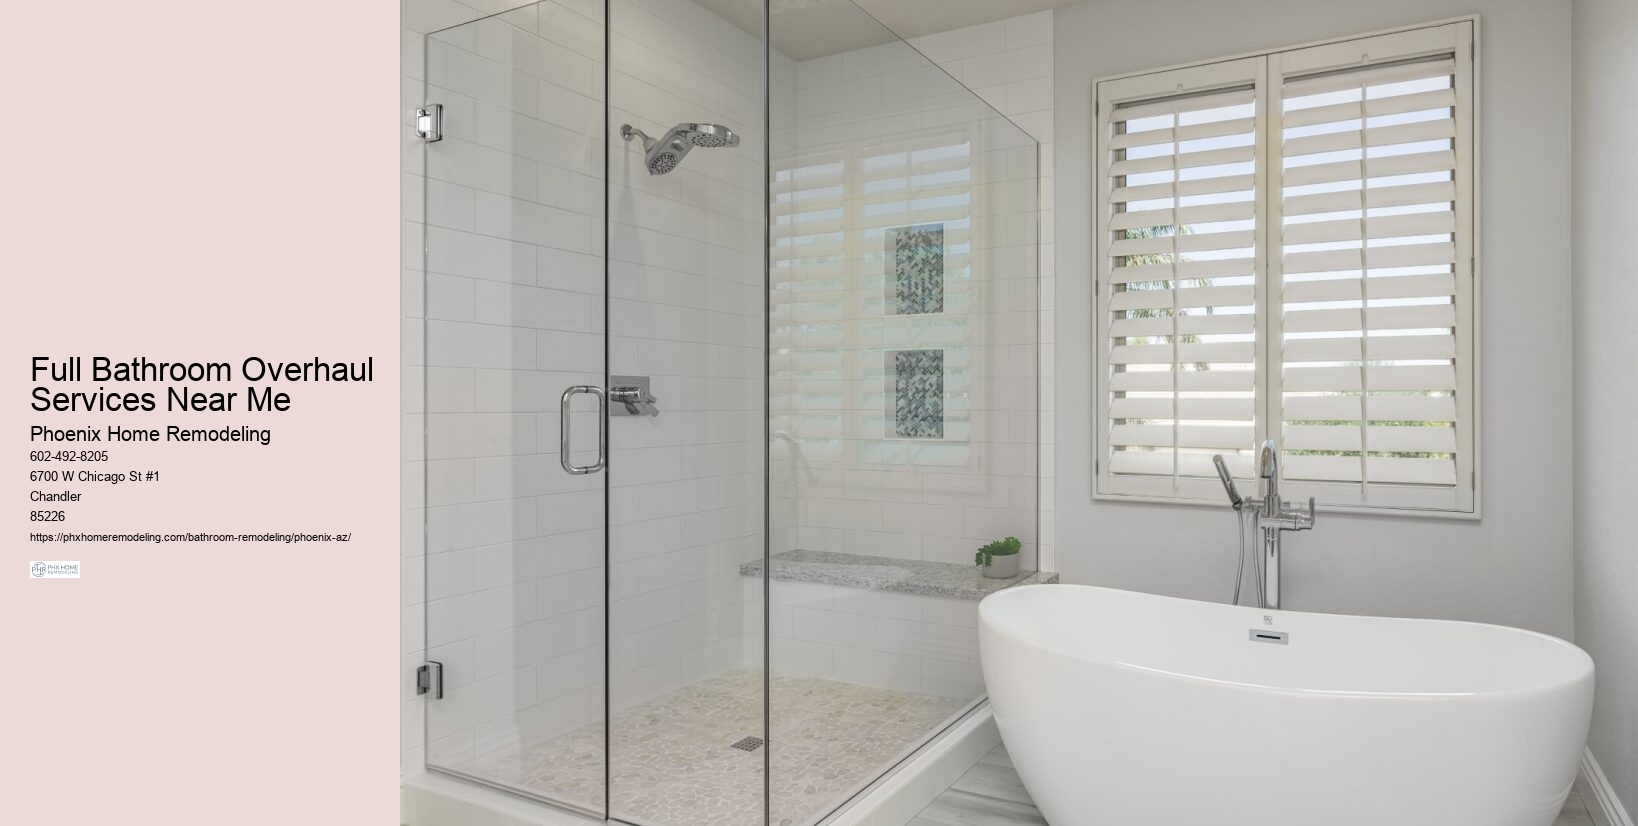 What questions should I ask for a bathroom remodel